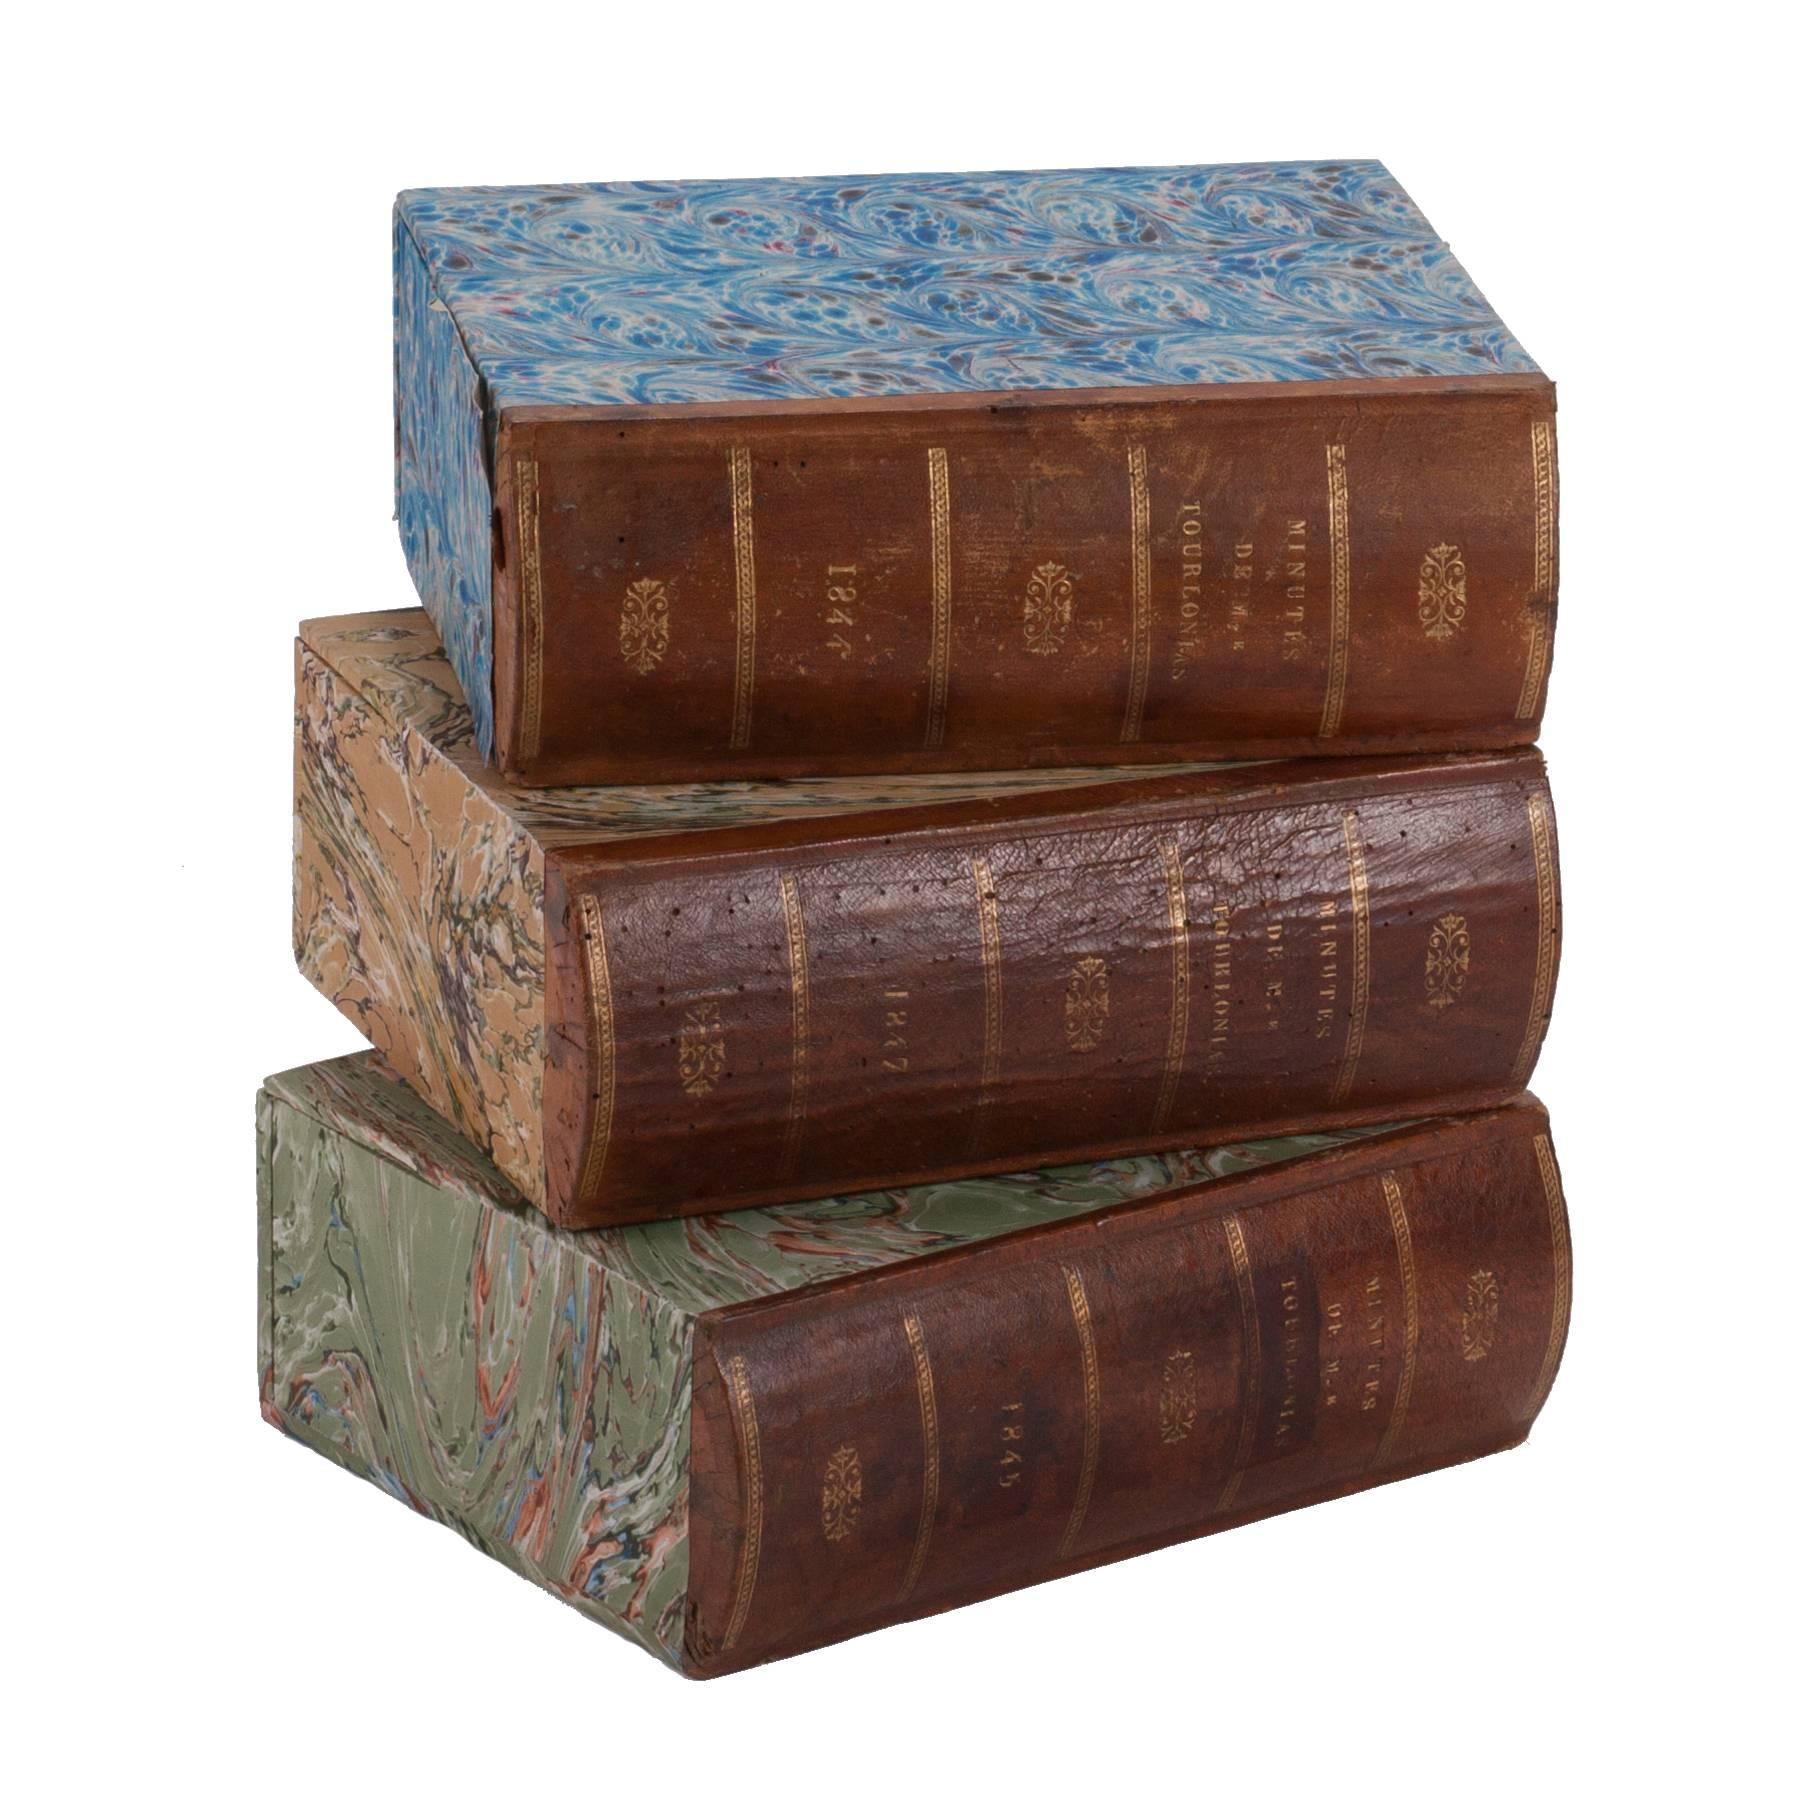 Three Brown Book Boxes from England Circa 1900